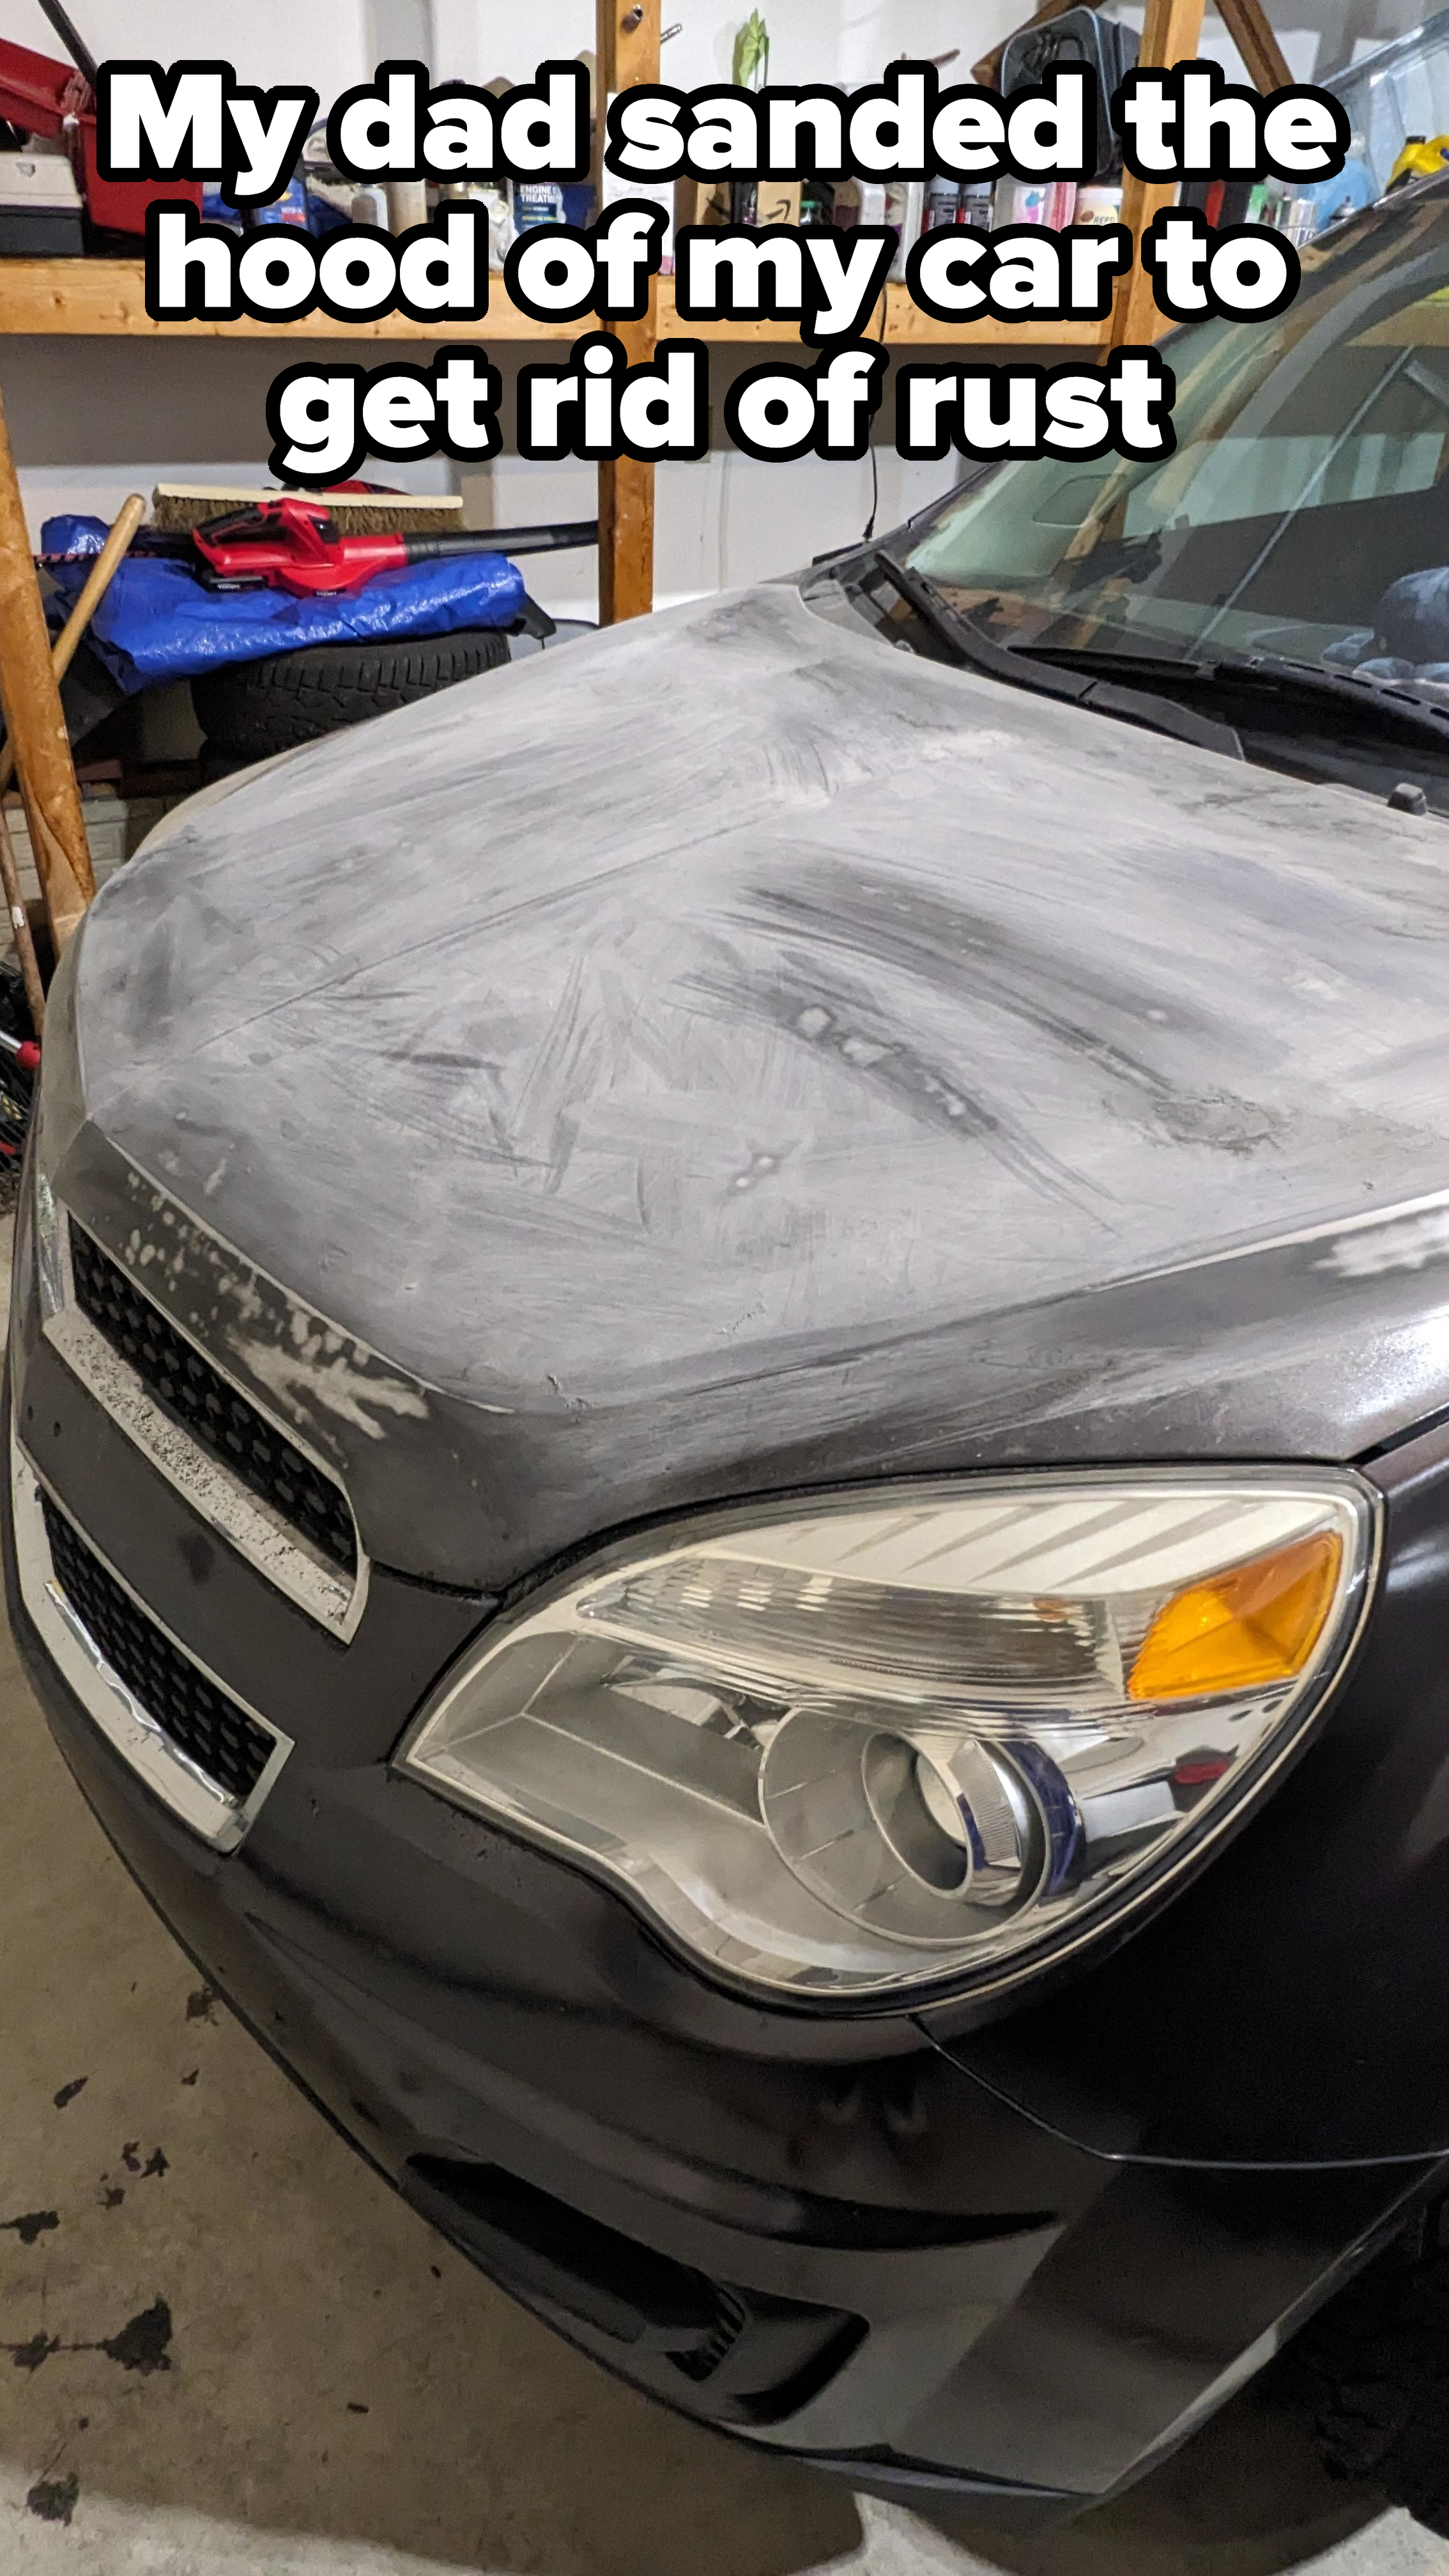 Front view of a car with a faded-looking hood, parked in a garage, with caption, &quot;My dad sanded the hood of my car to get rid of rust&quot;